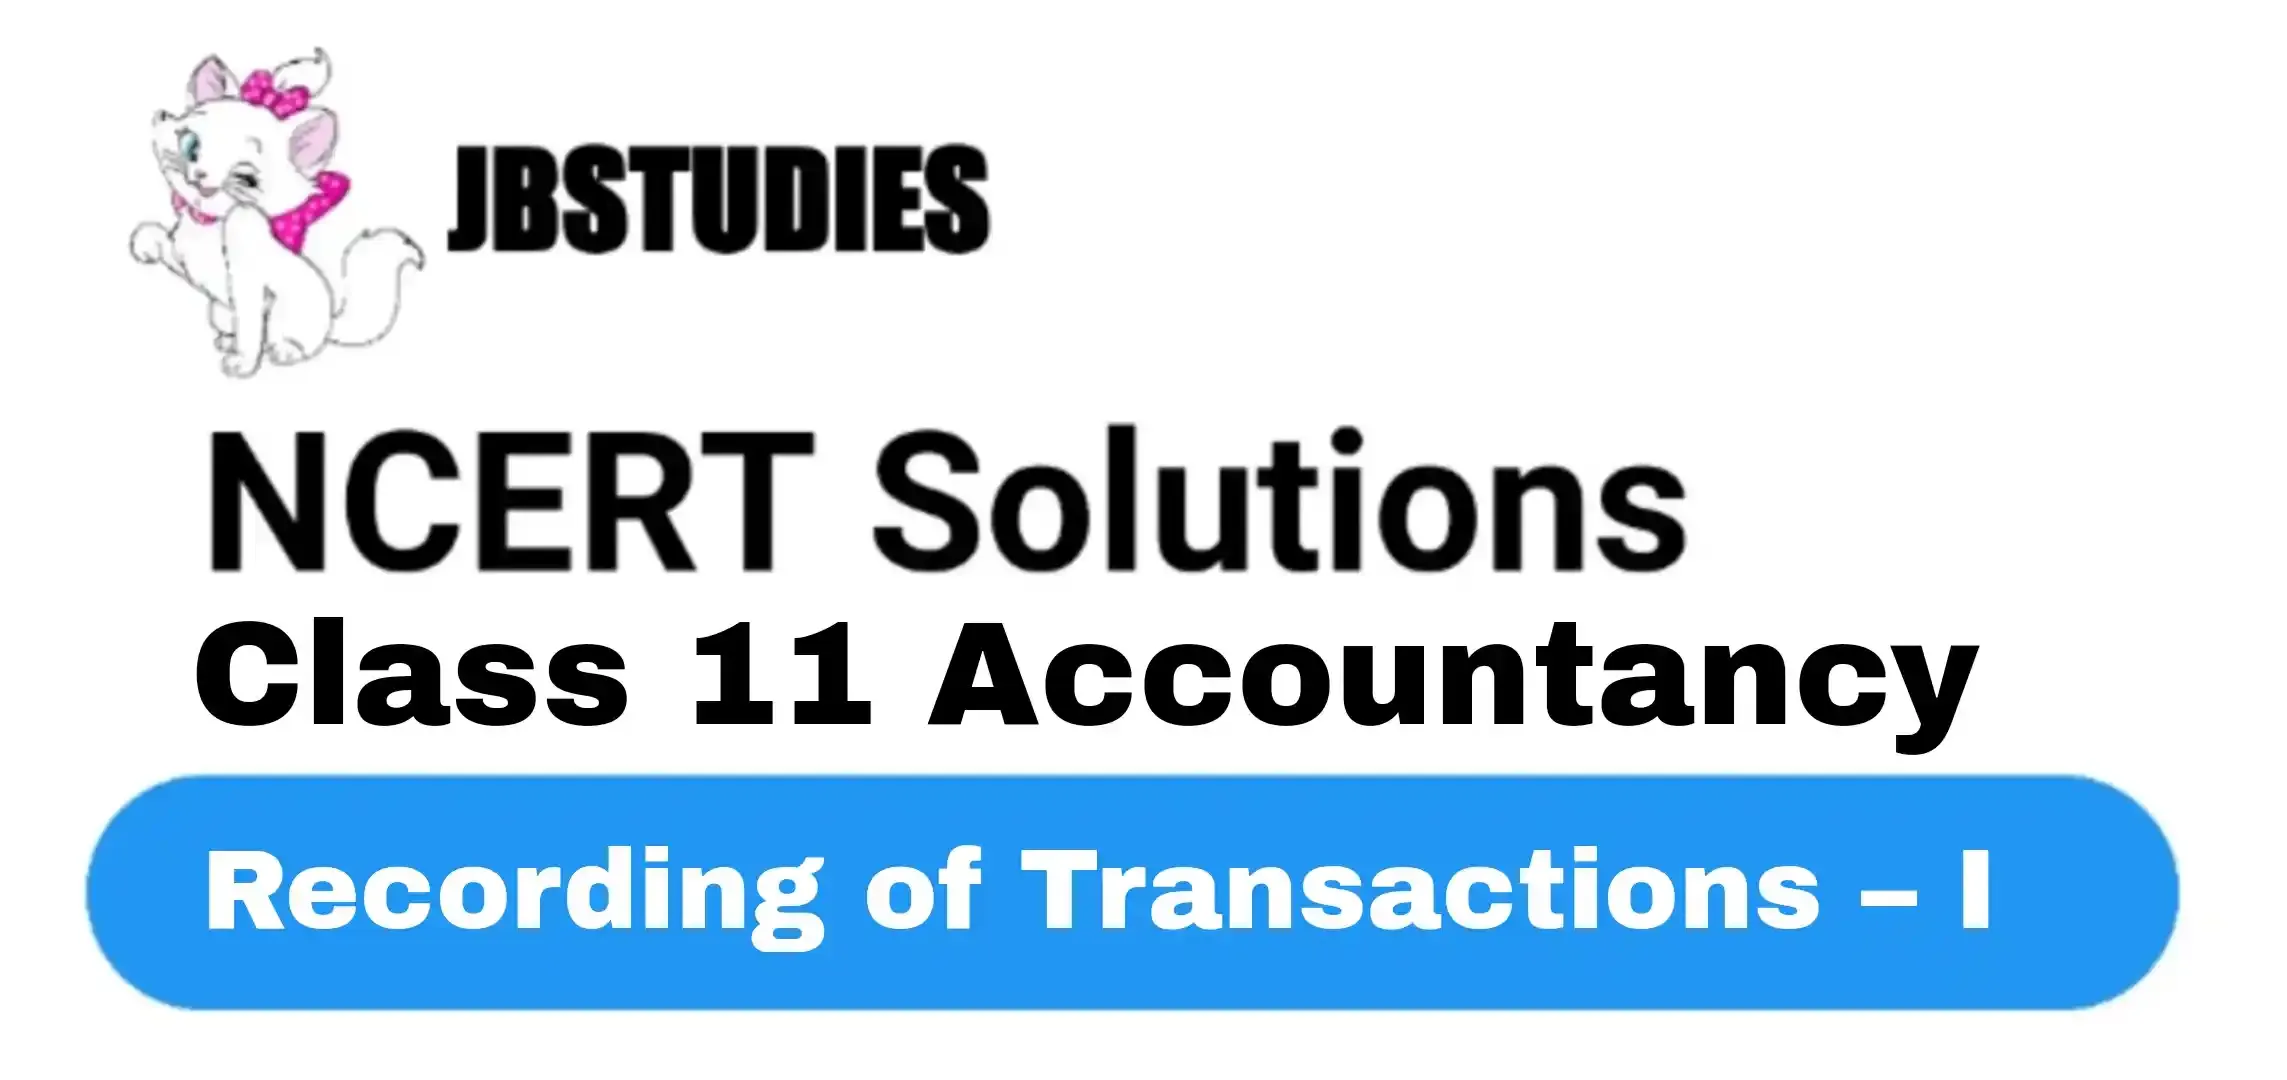 Solutions Class 11 Accountancy Chapter -3 (Recording of Transactions-I)